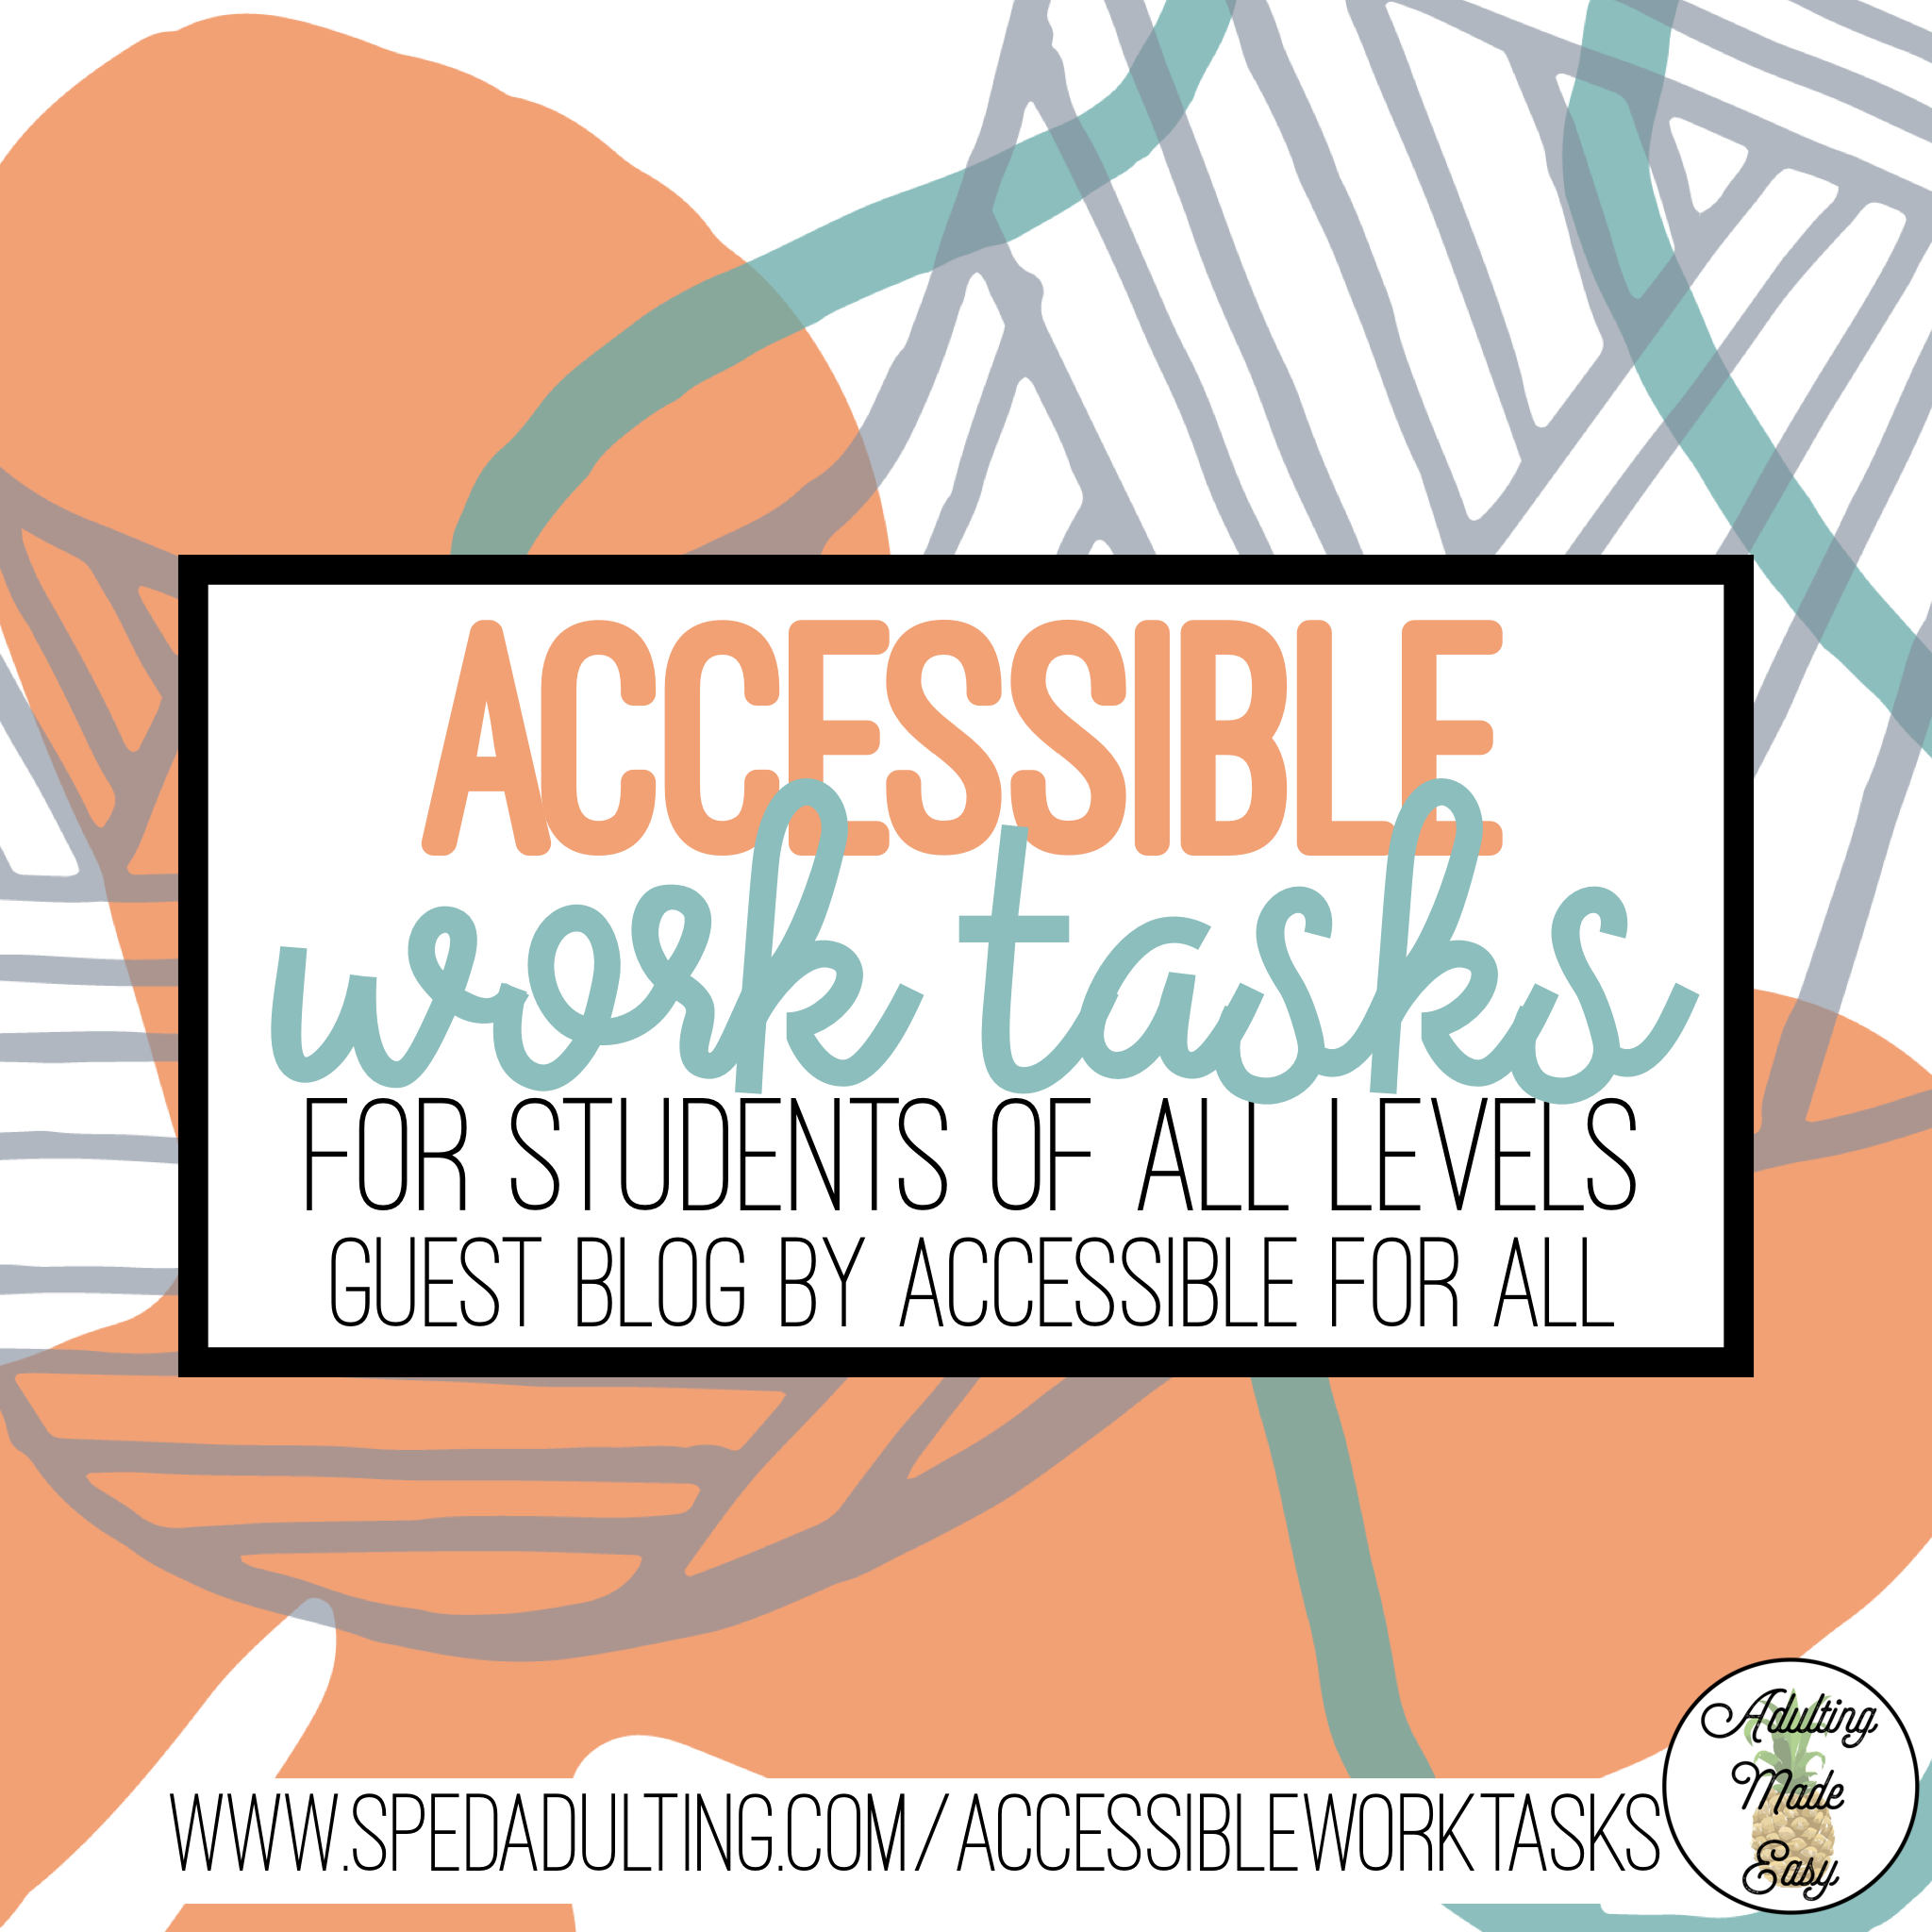 Accessible Work Tasks for students of all levels